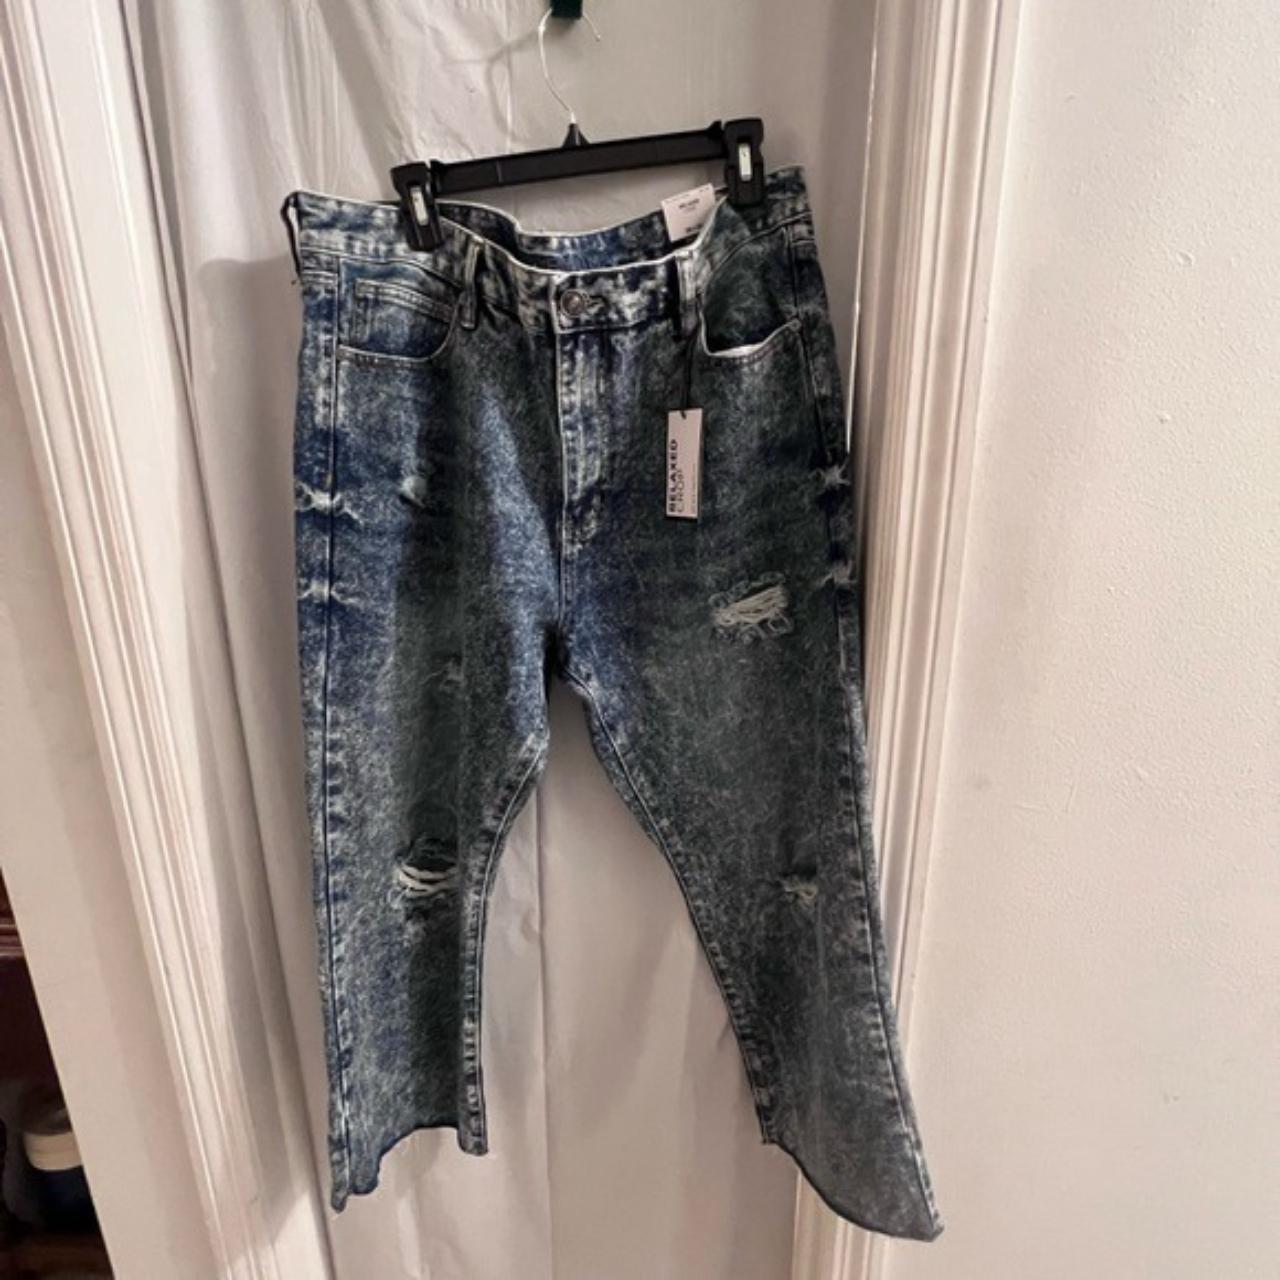 Nwt rue 21 men's relaxed crop jeans size... - Depop